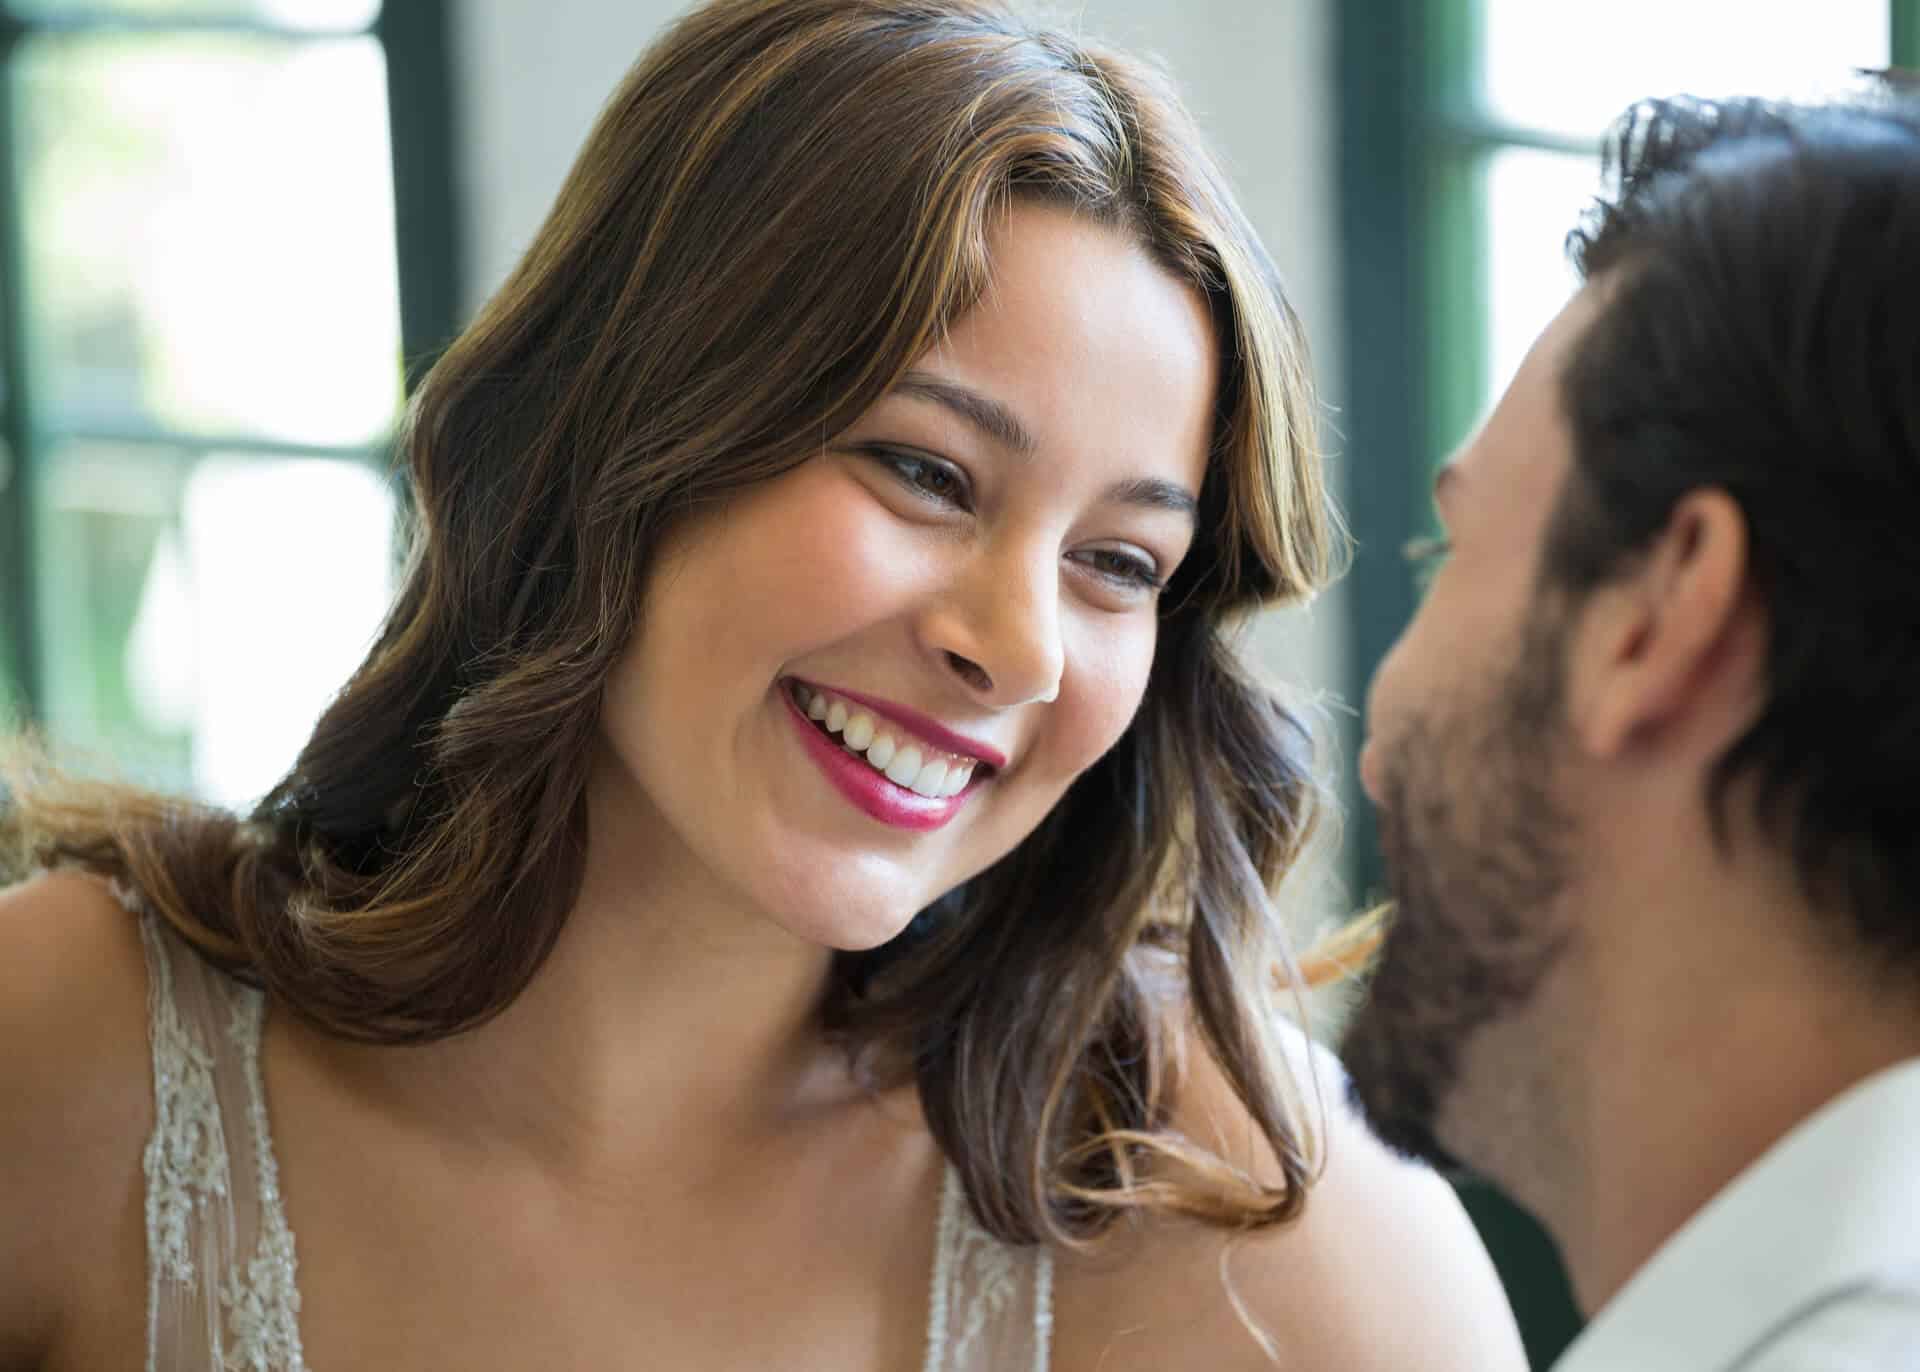 smiling woman looking at man in restaurant